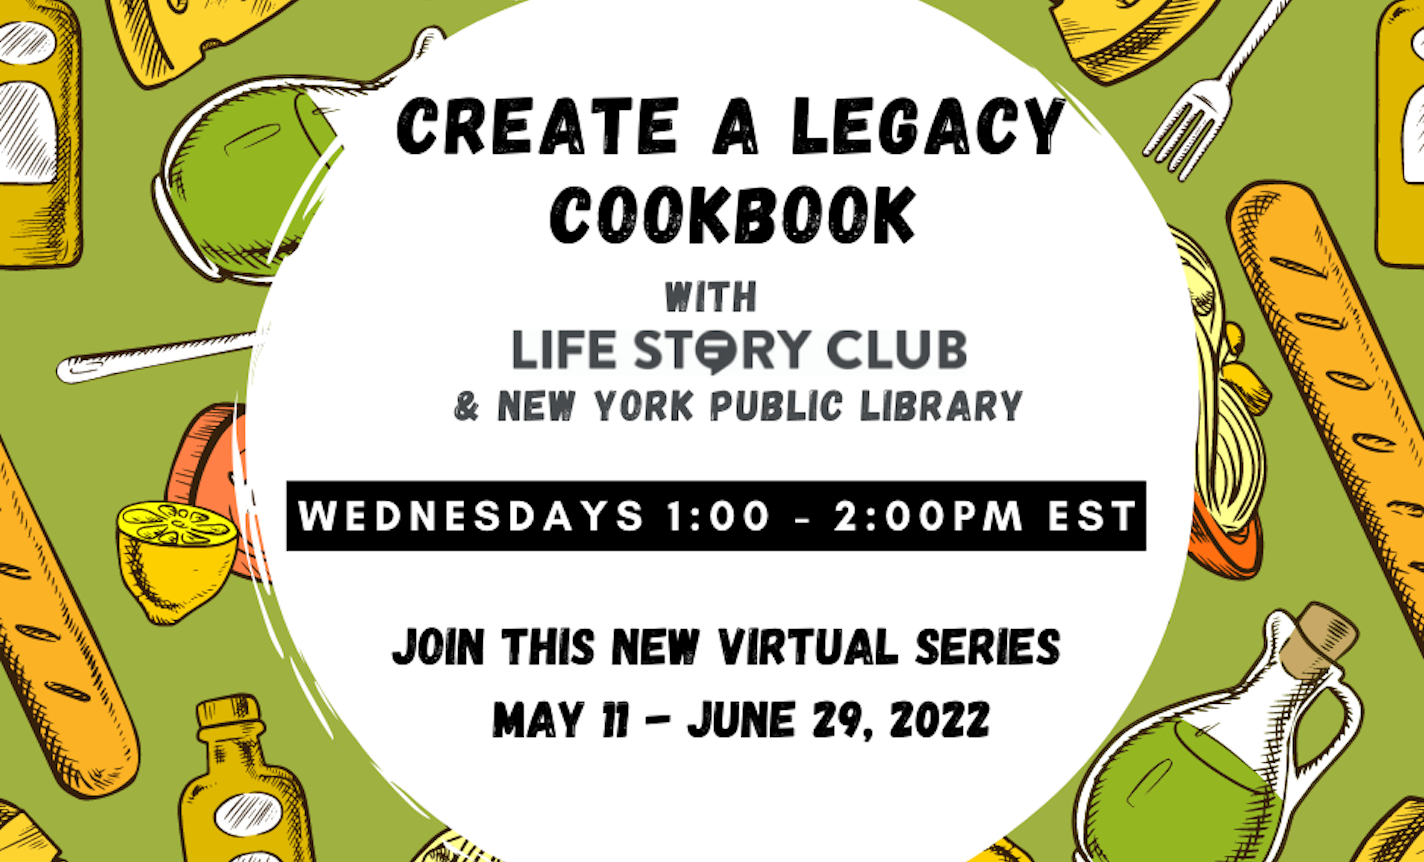 Create a Legacy Cookbook with Life Story Club